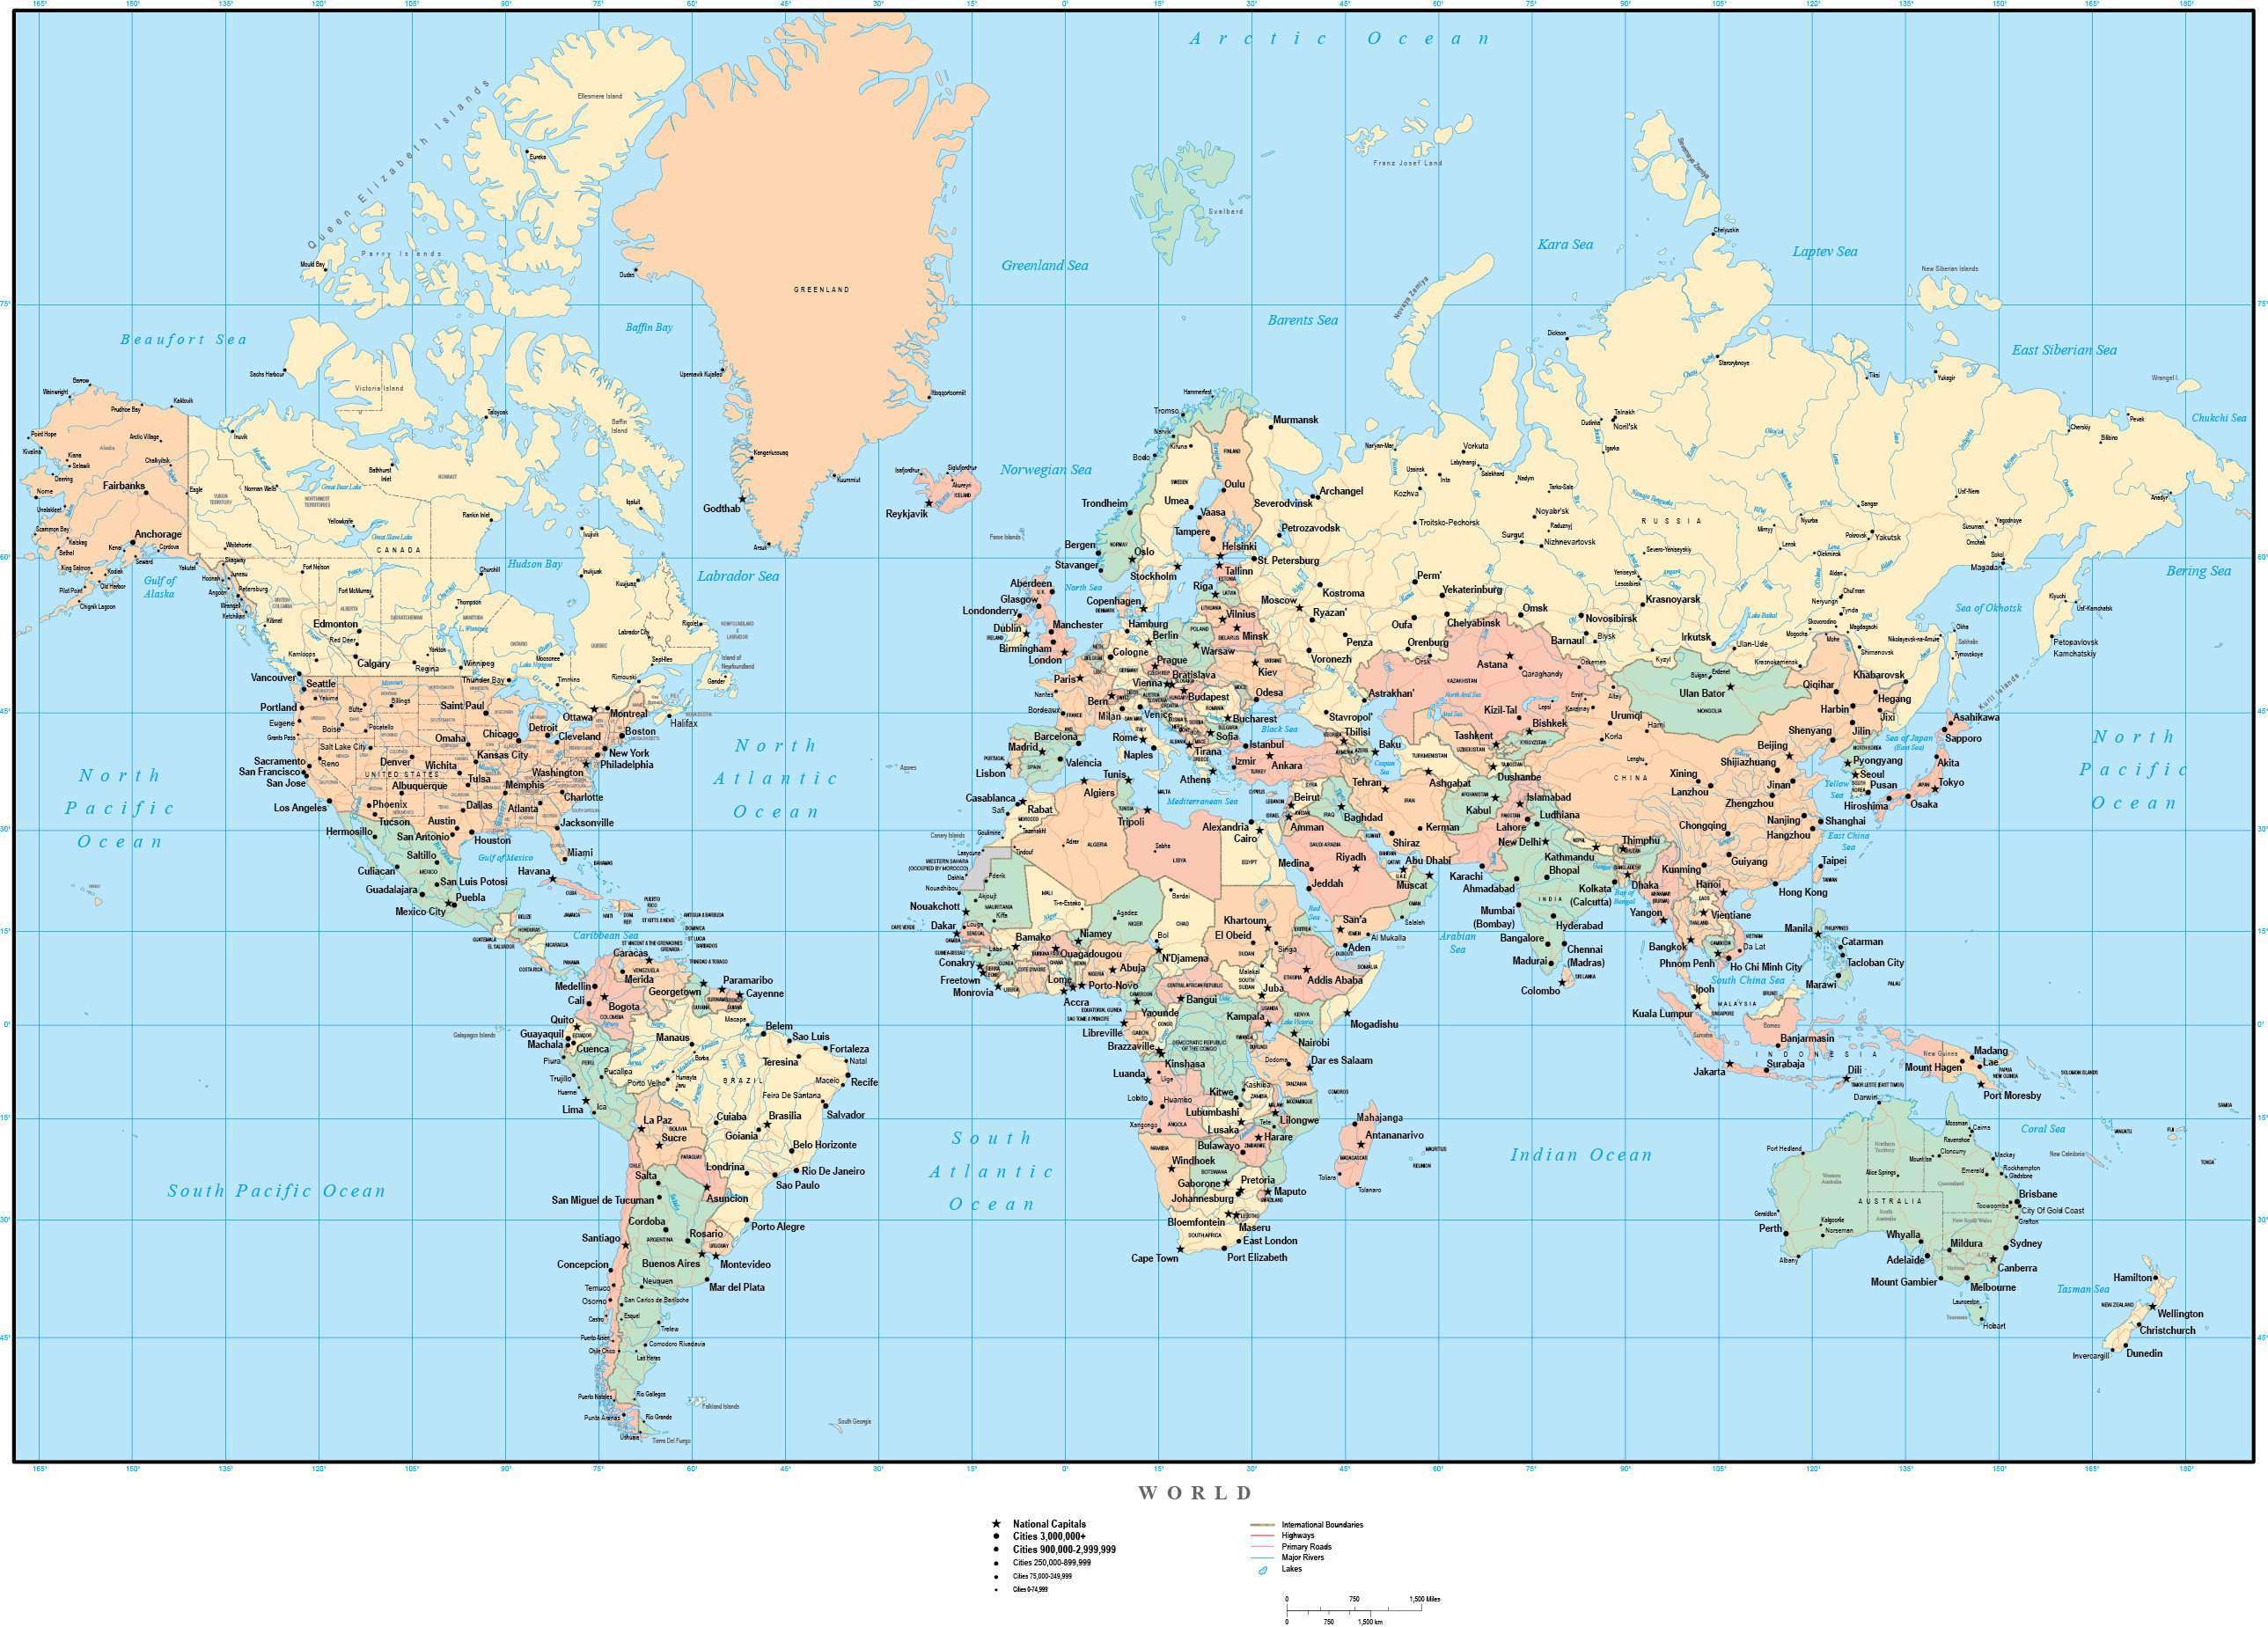 World Map Europe Centered With US States & Canadian